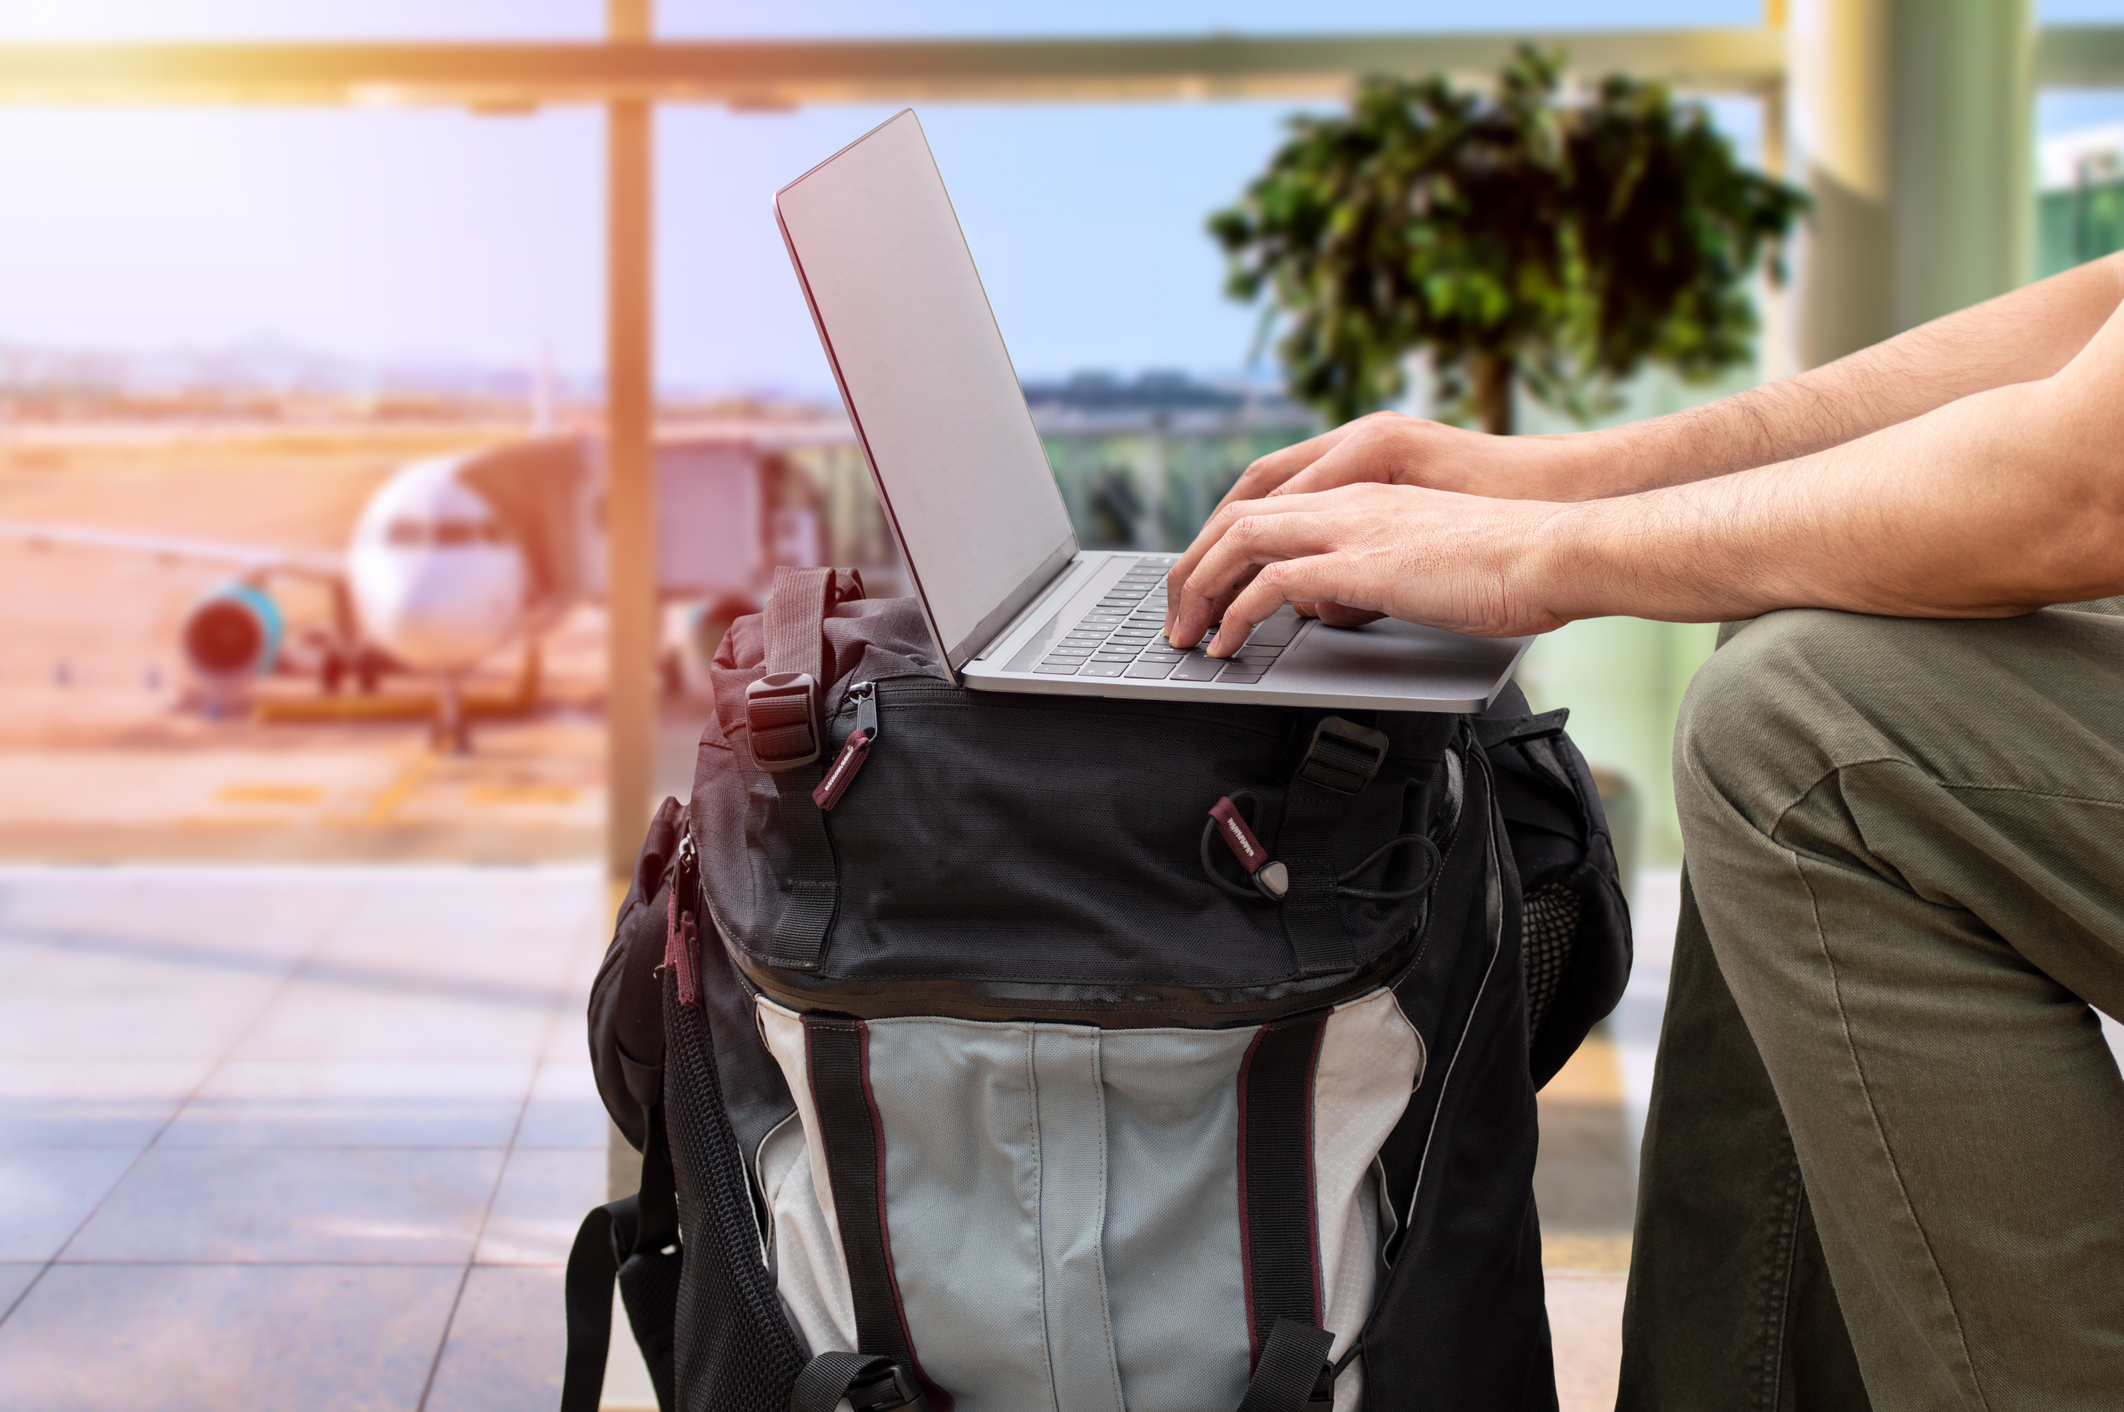 Working on a laptop at an airport. Digital nomads are experts at minimalist packing. (photo: iStock)